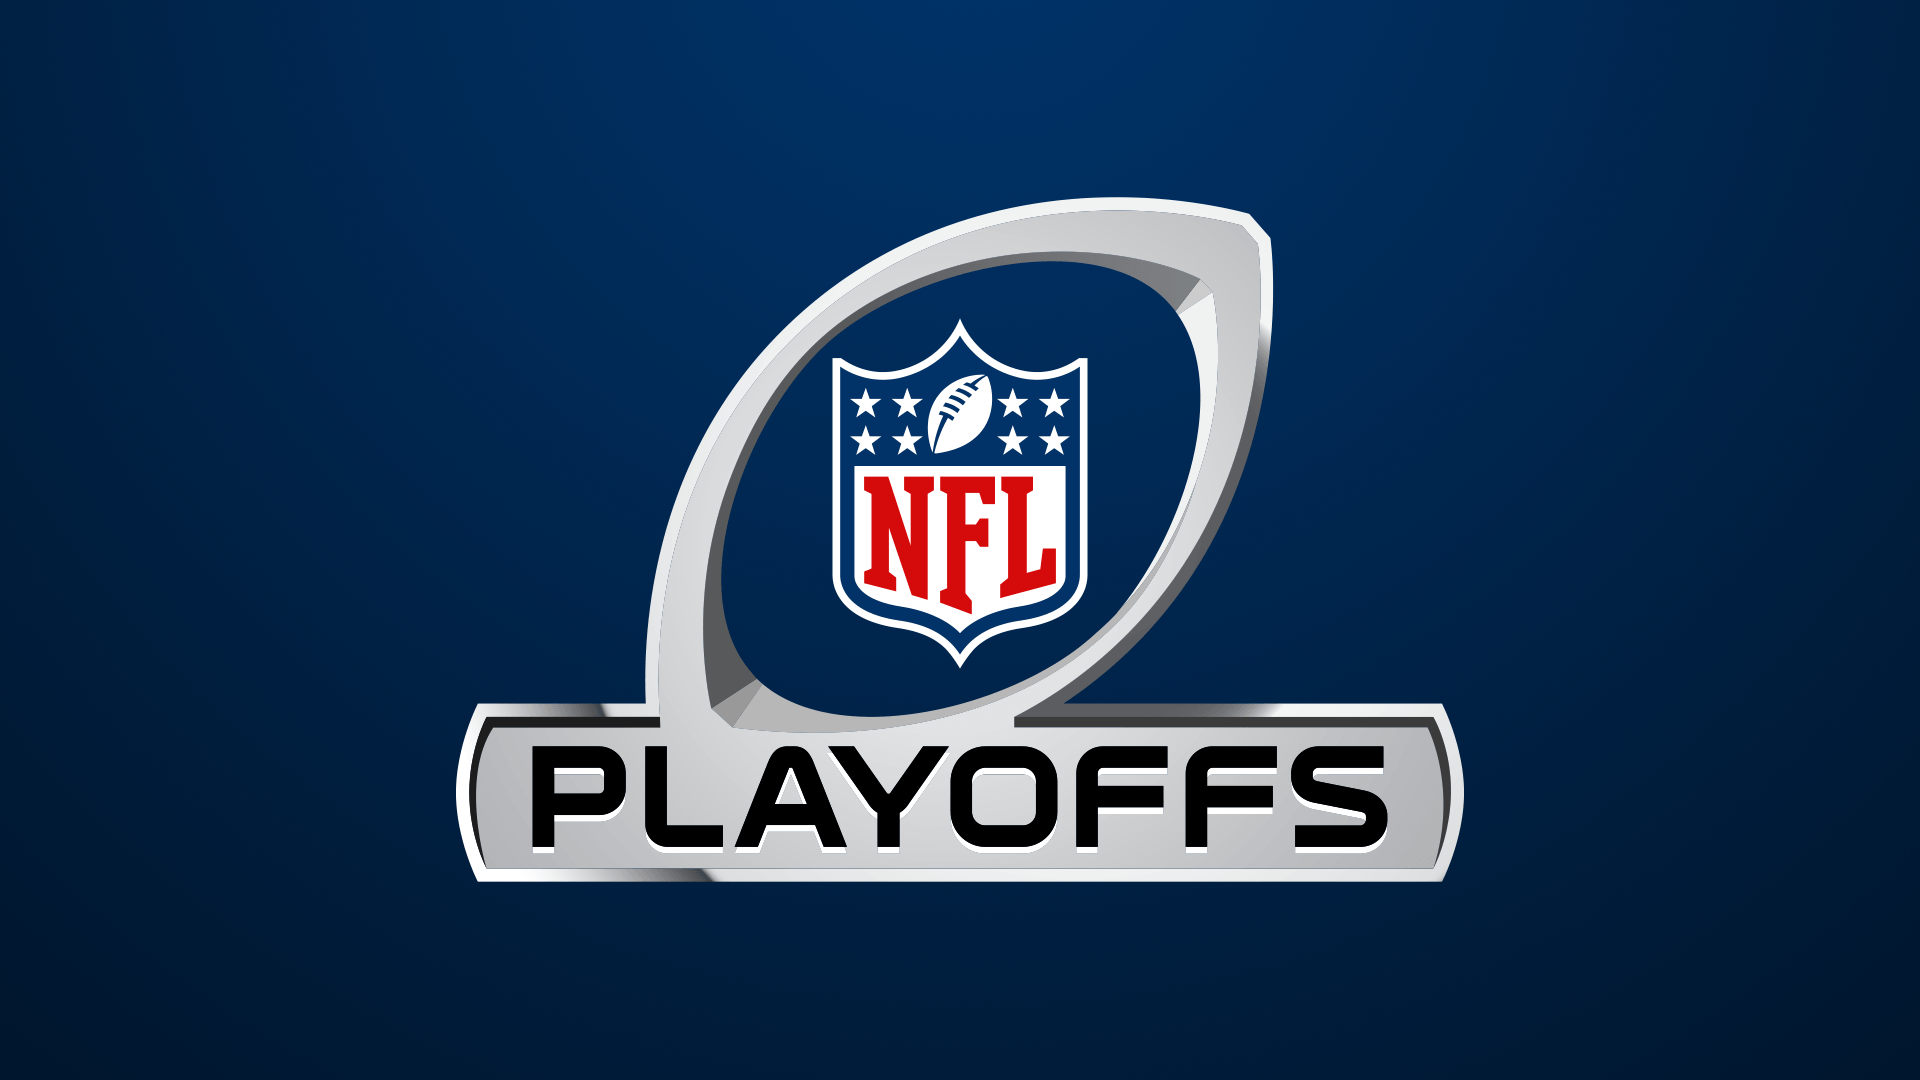 NFL Wild Card and Divisional Playoff schedule announced